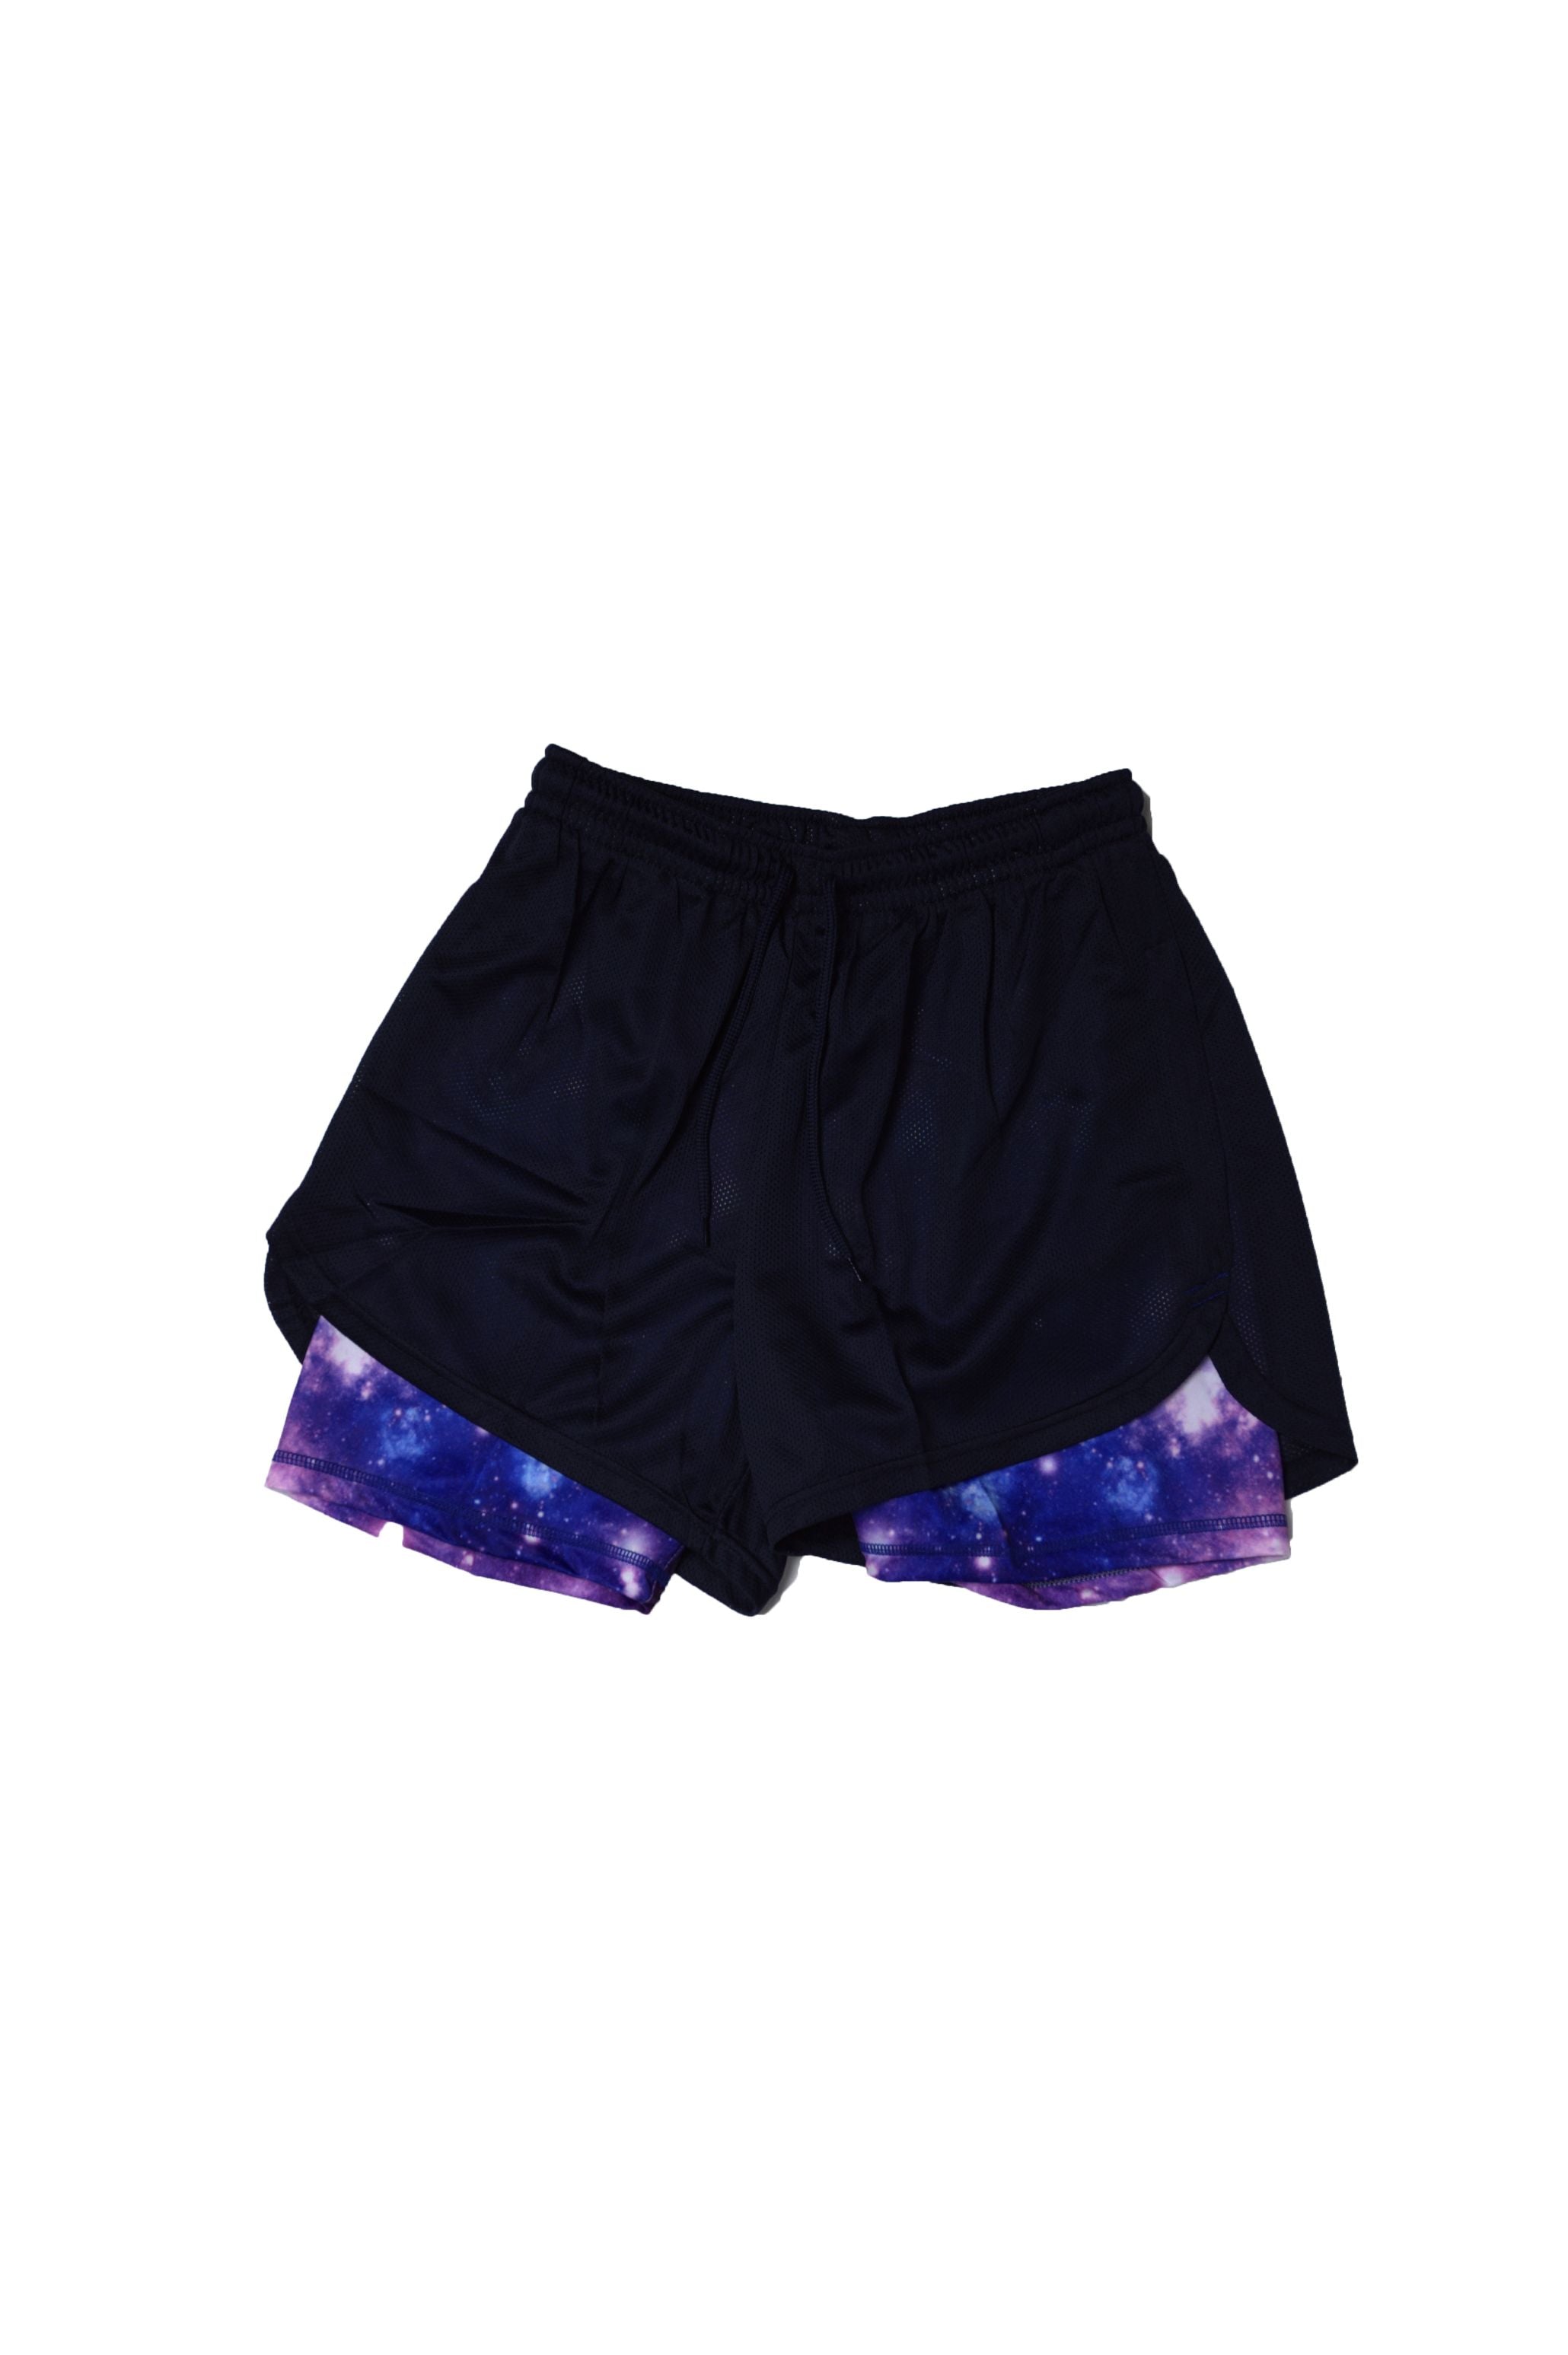 WOMEN FITNESS SHORTS COLORED